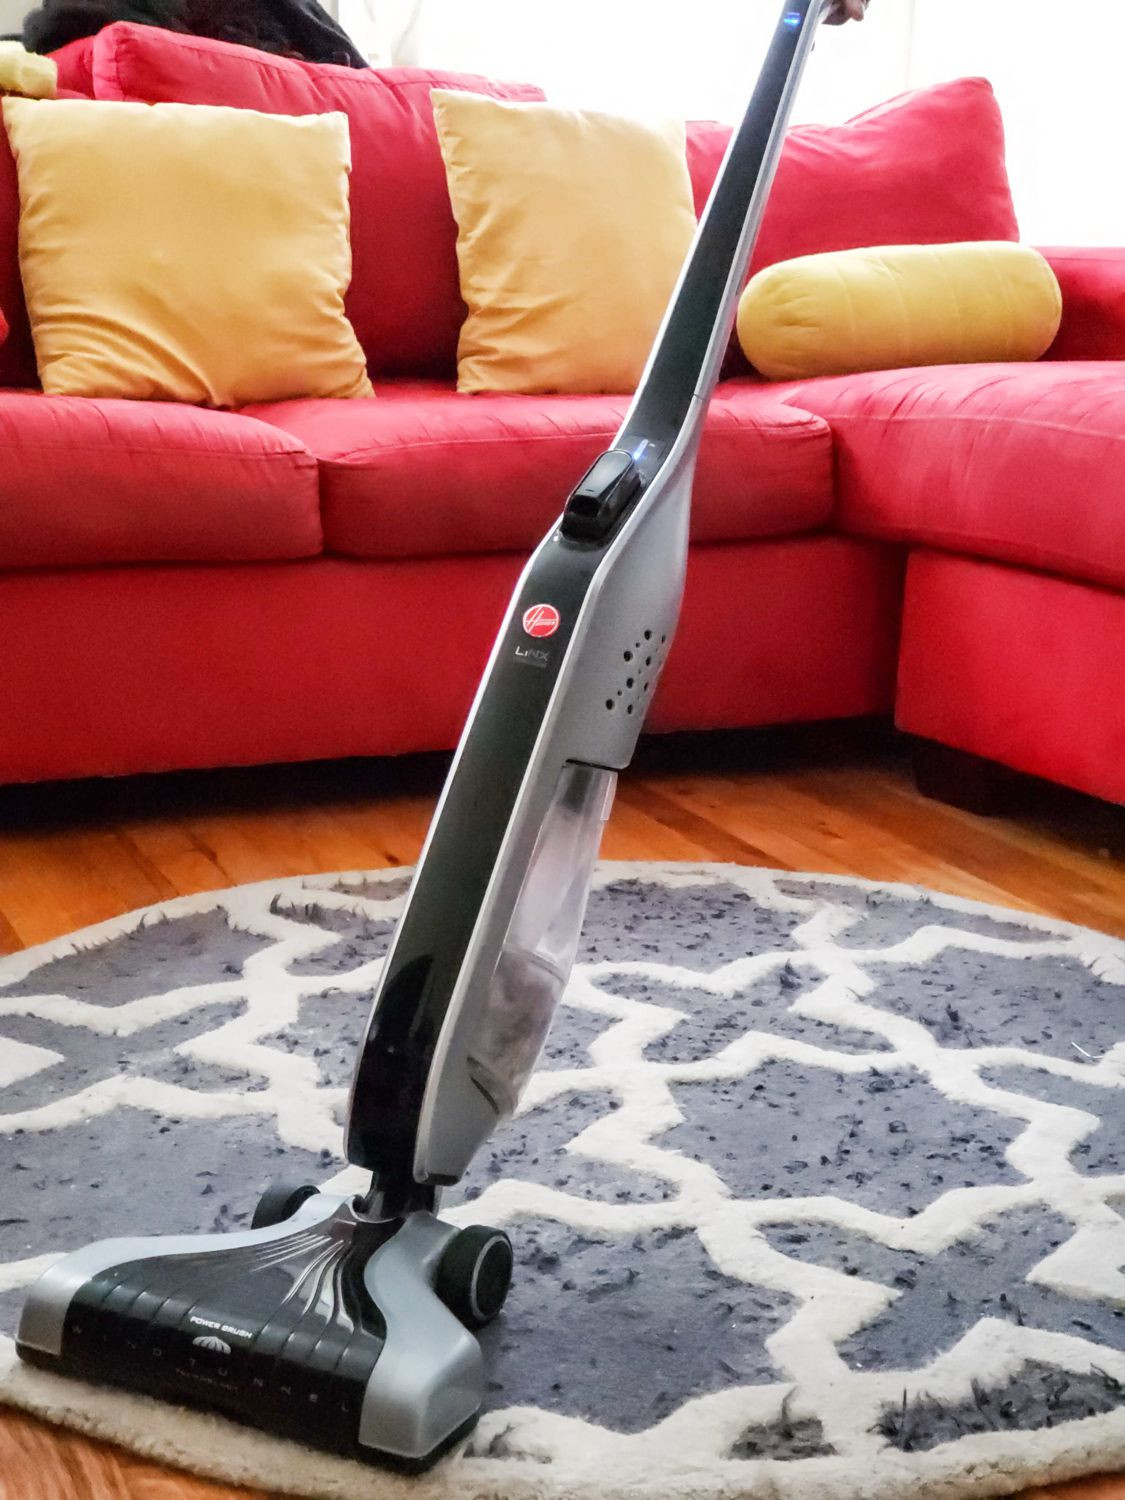 16 Lovable Hardwood Floor Vacuum Reviews 2024 free download hardwood floor vacuum reviews of the 10 best vacuum cleaners to buy in 2018 pertaining to 4135822 2 5bbf7230c9e77c005168f21c